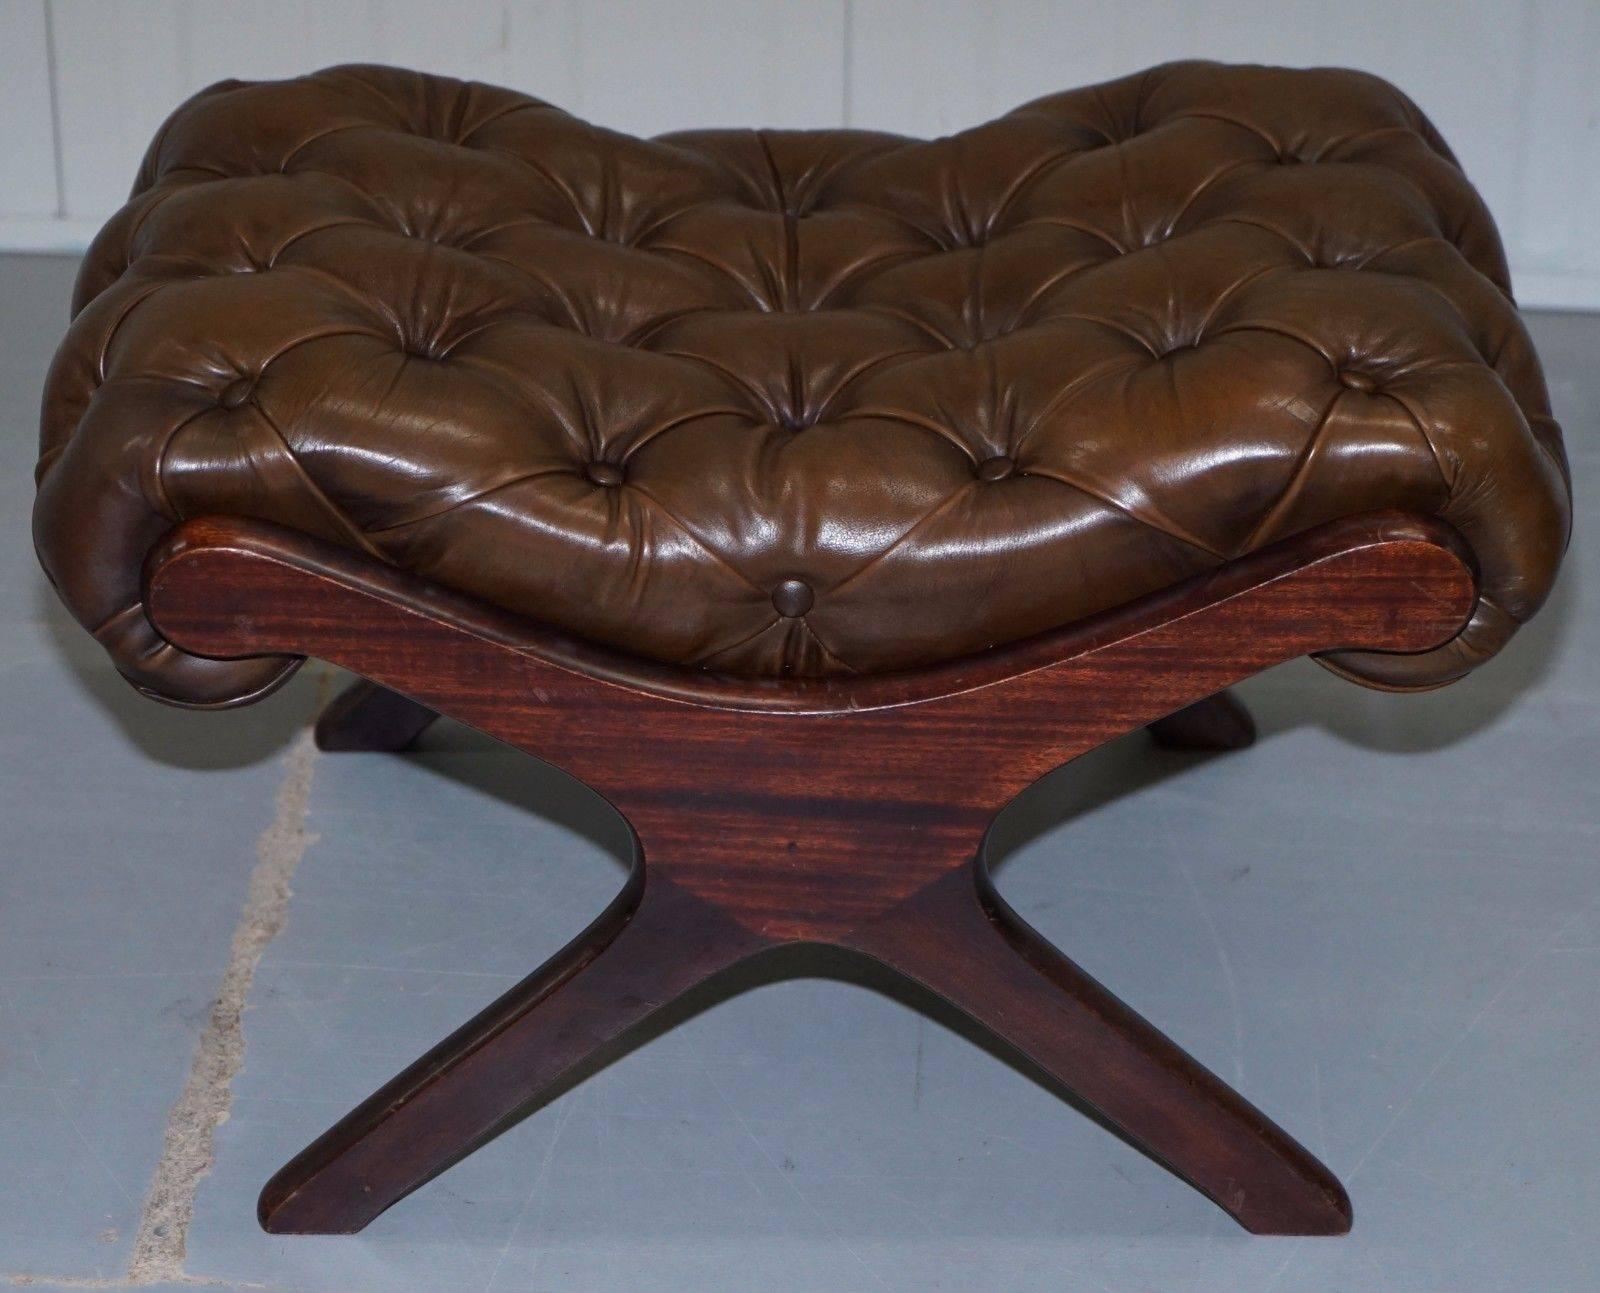 We are delighted to offer for sale this matching pair of stunning vintage aged brown leather full sized Chesterfield footstool/ottomans

A really good looking vintage pair with solid mahogany frames and overstuffed heritage leather upholstery,